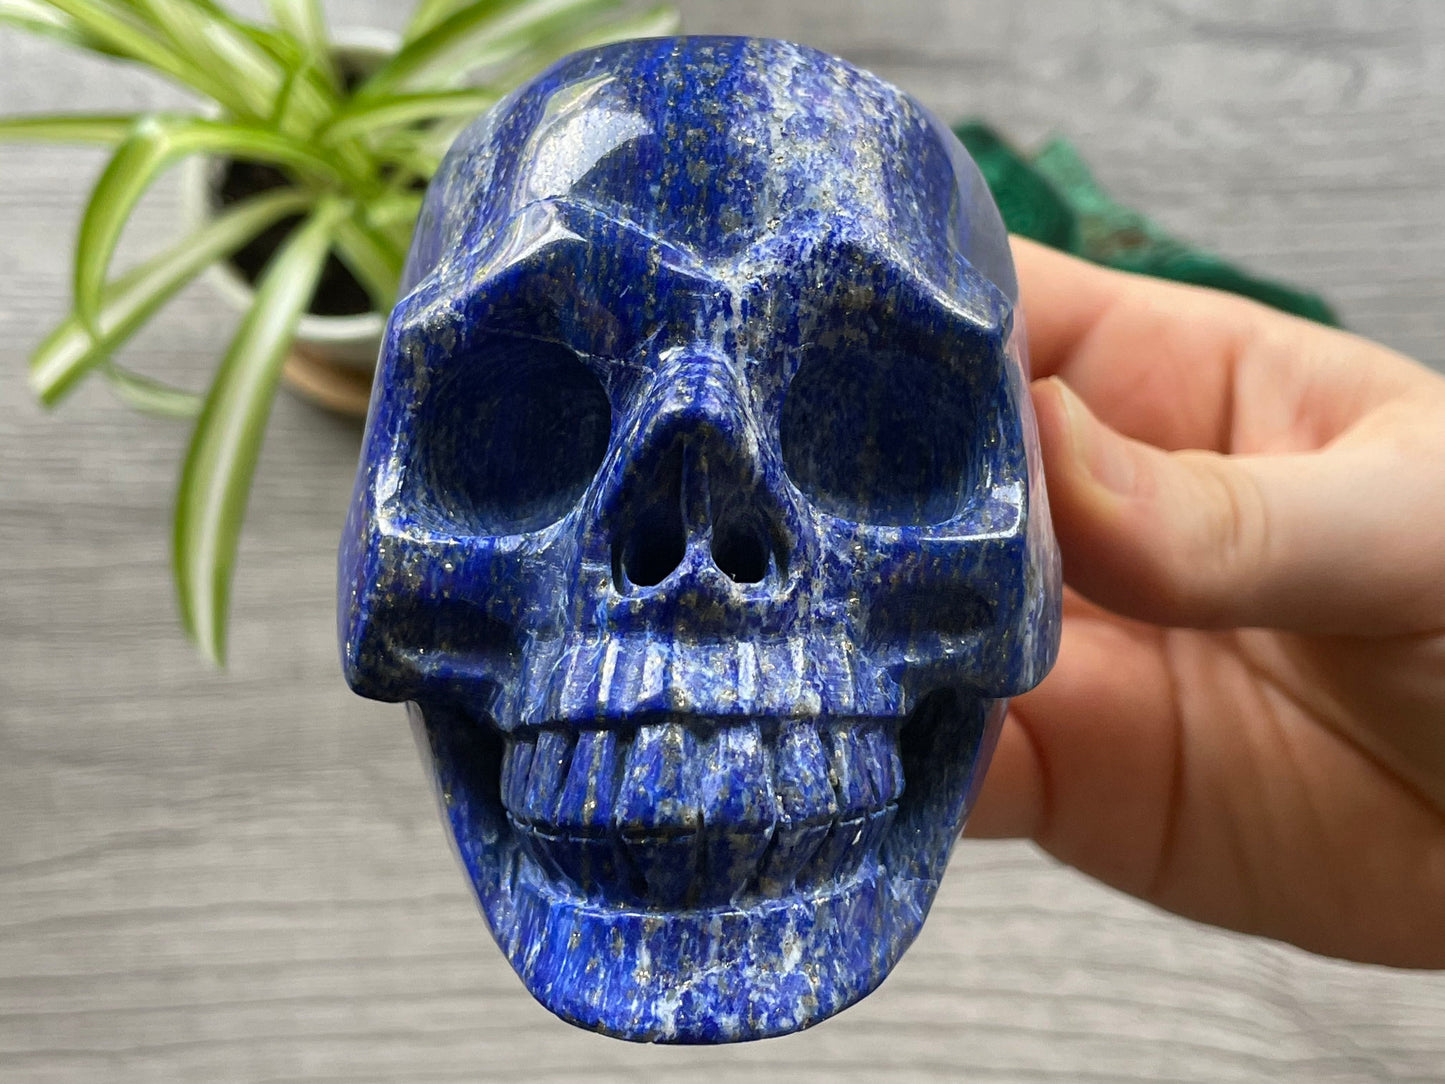 Pictured is a large skull carved out of lapis lazuli.